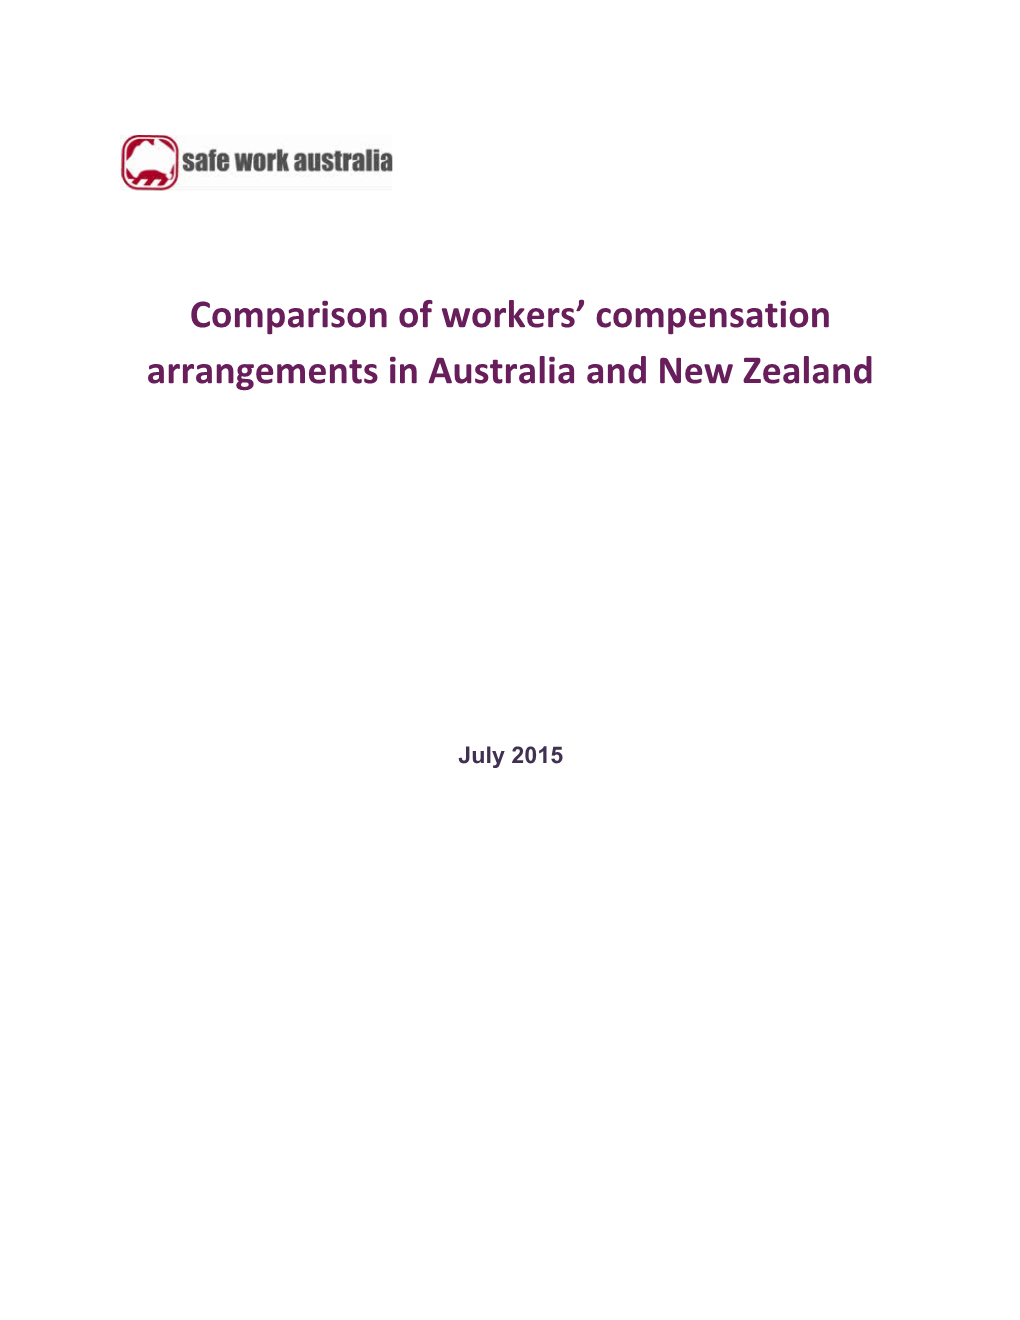 Comparison of Workers' Compensation Arrangements in Australia and New Zealand